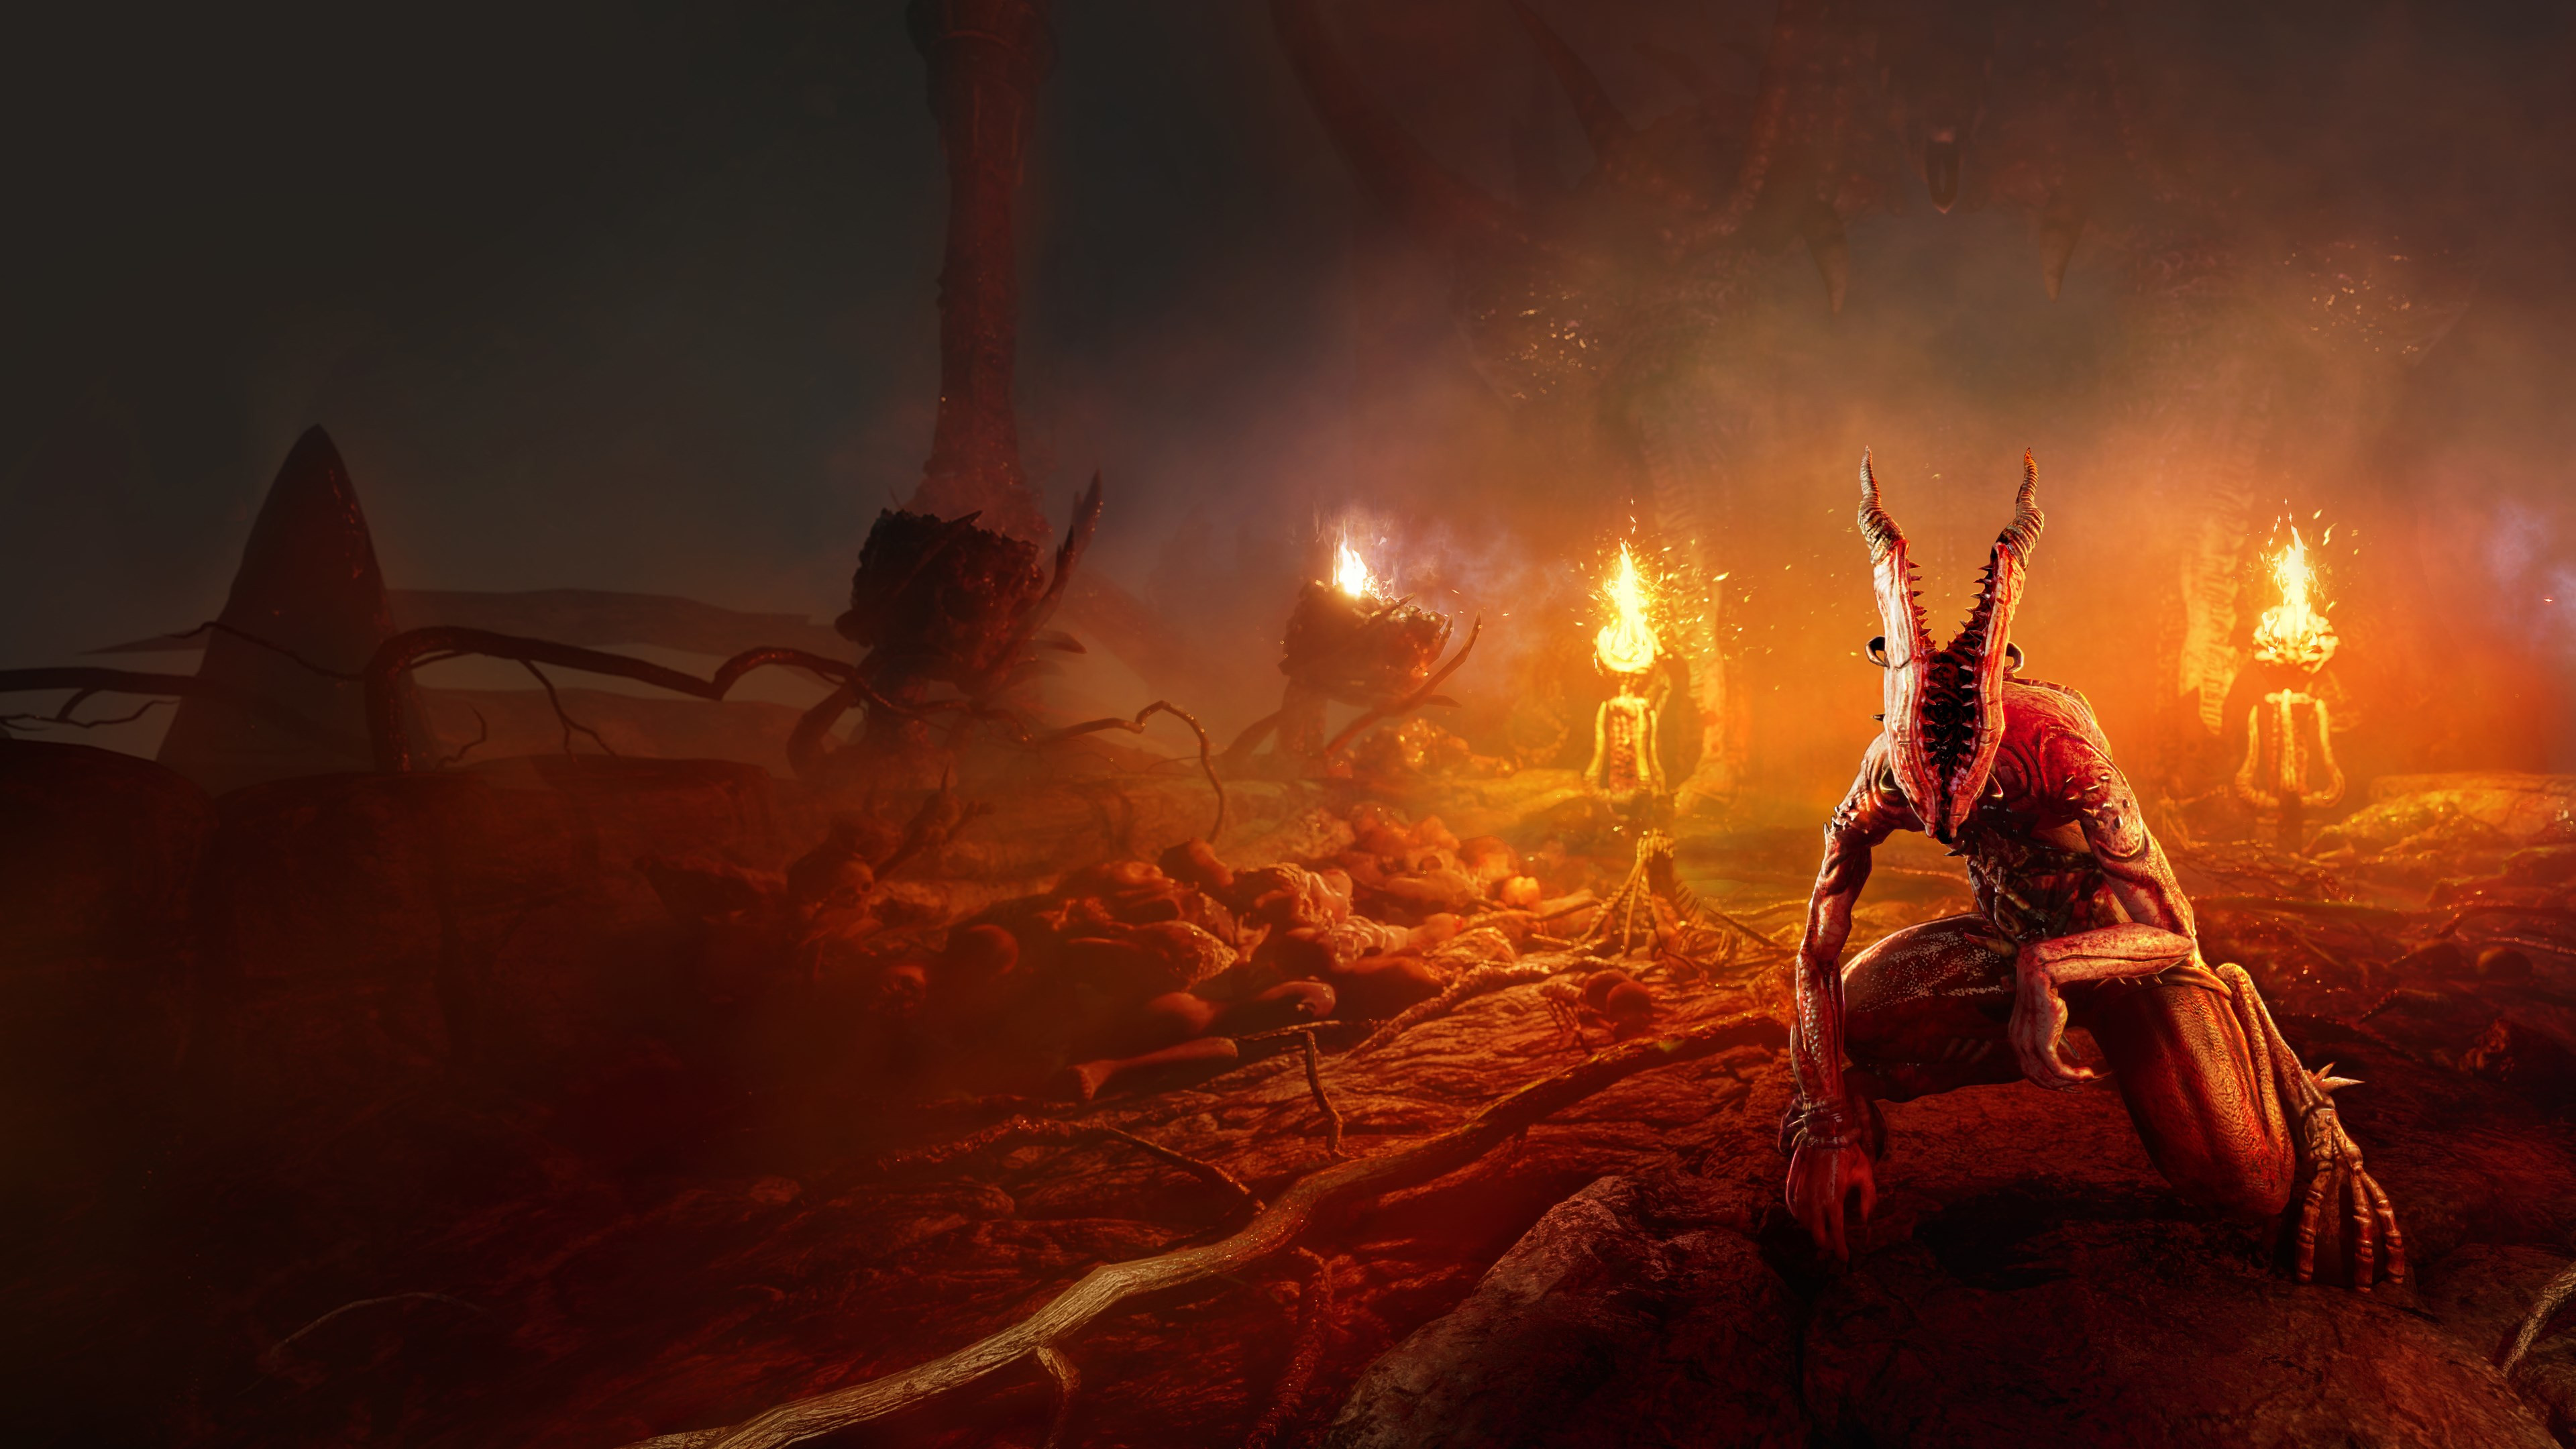 Agony, the video game wallpaper 3840x2160